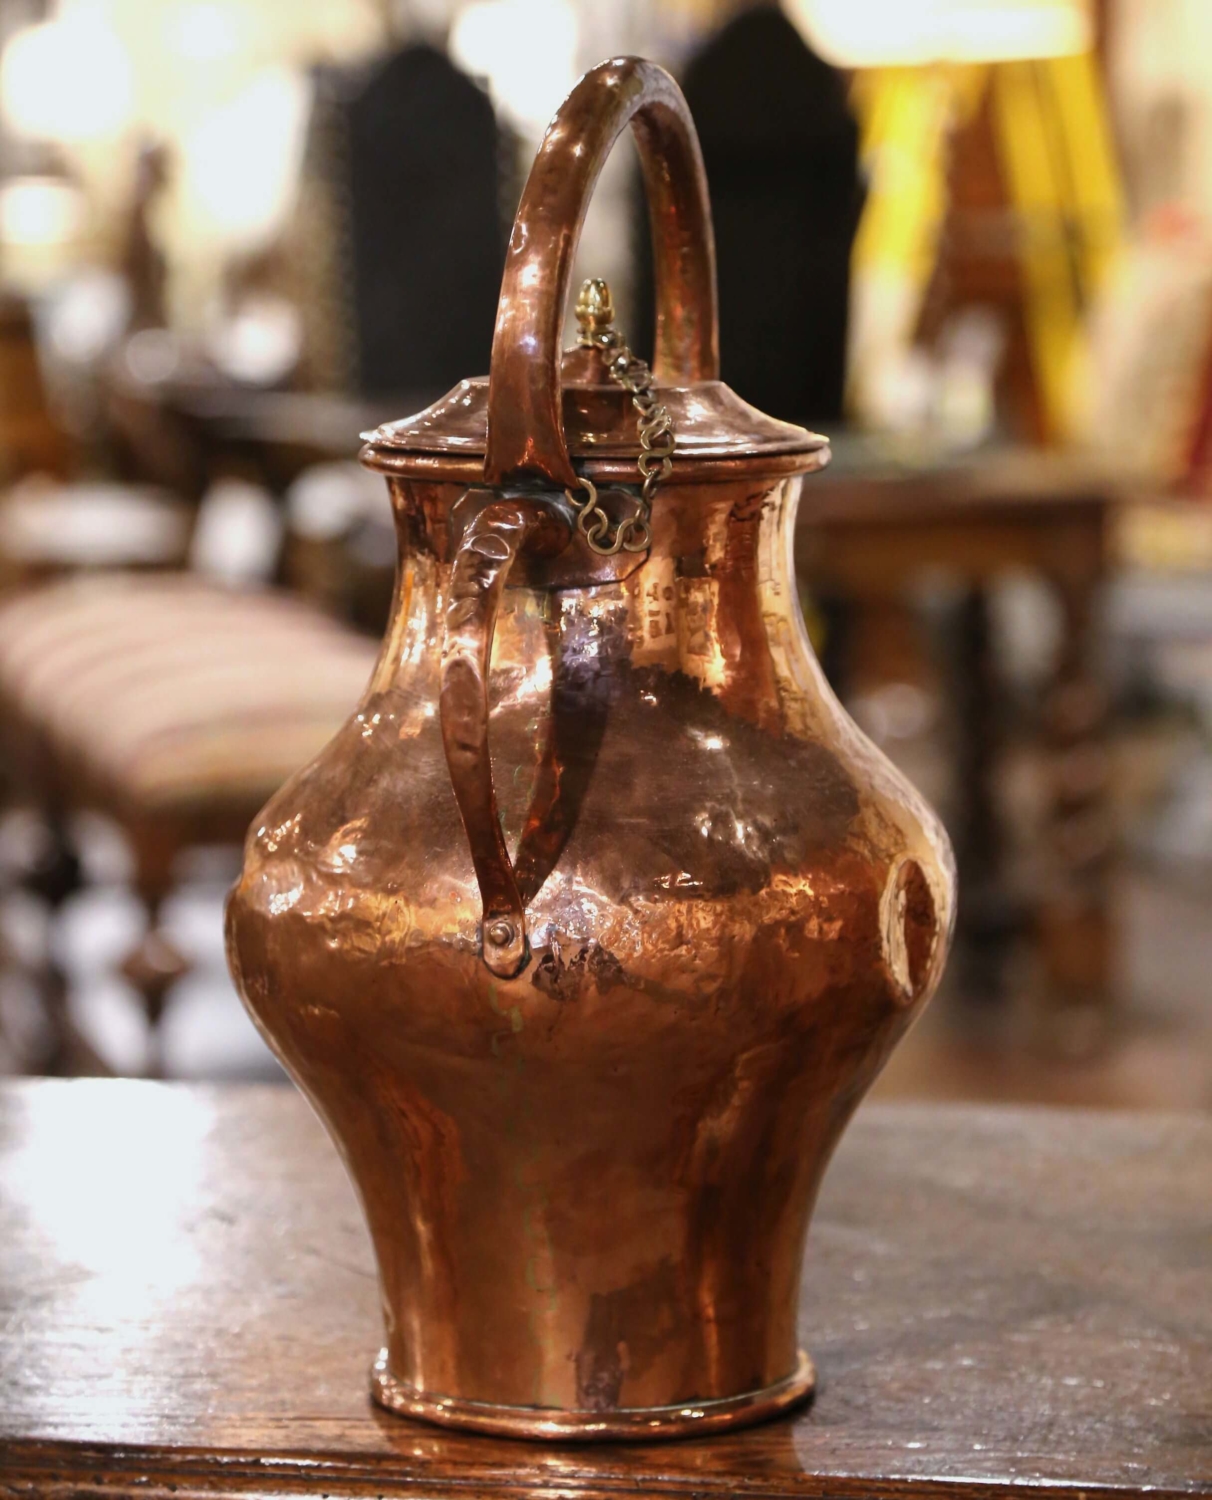 Mid-18th Century French Polished Copper Water Pitcher with Lid